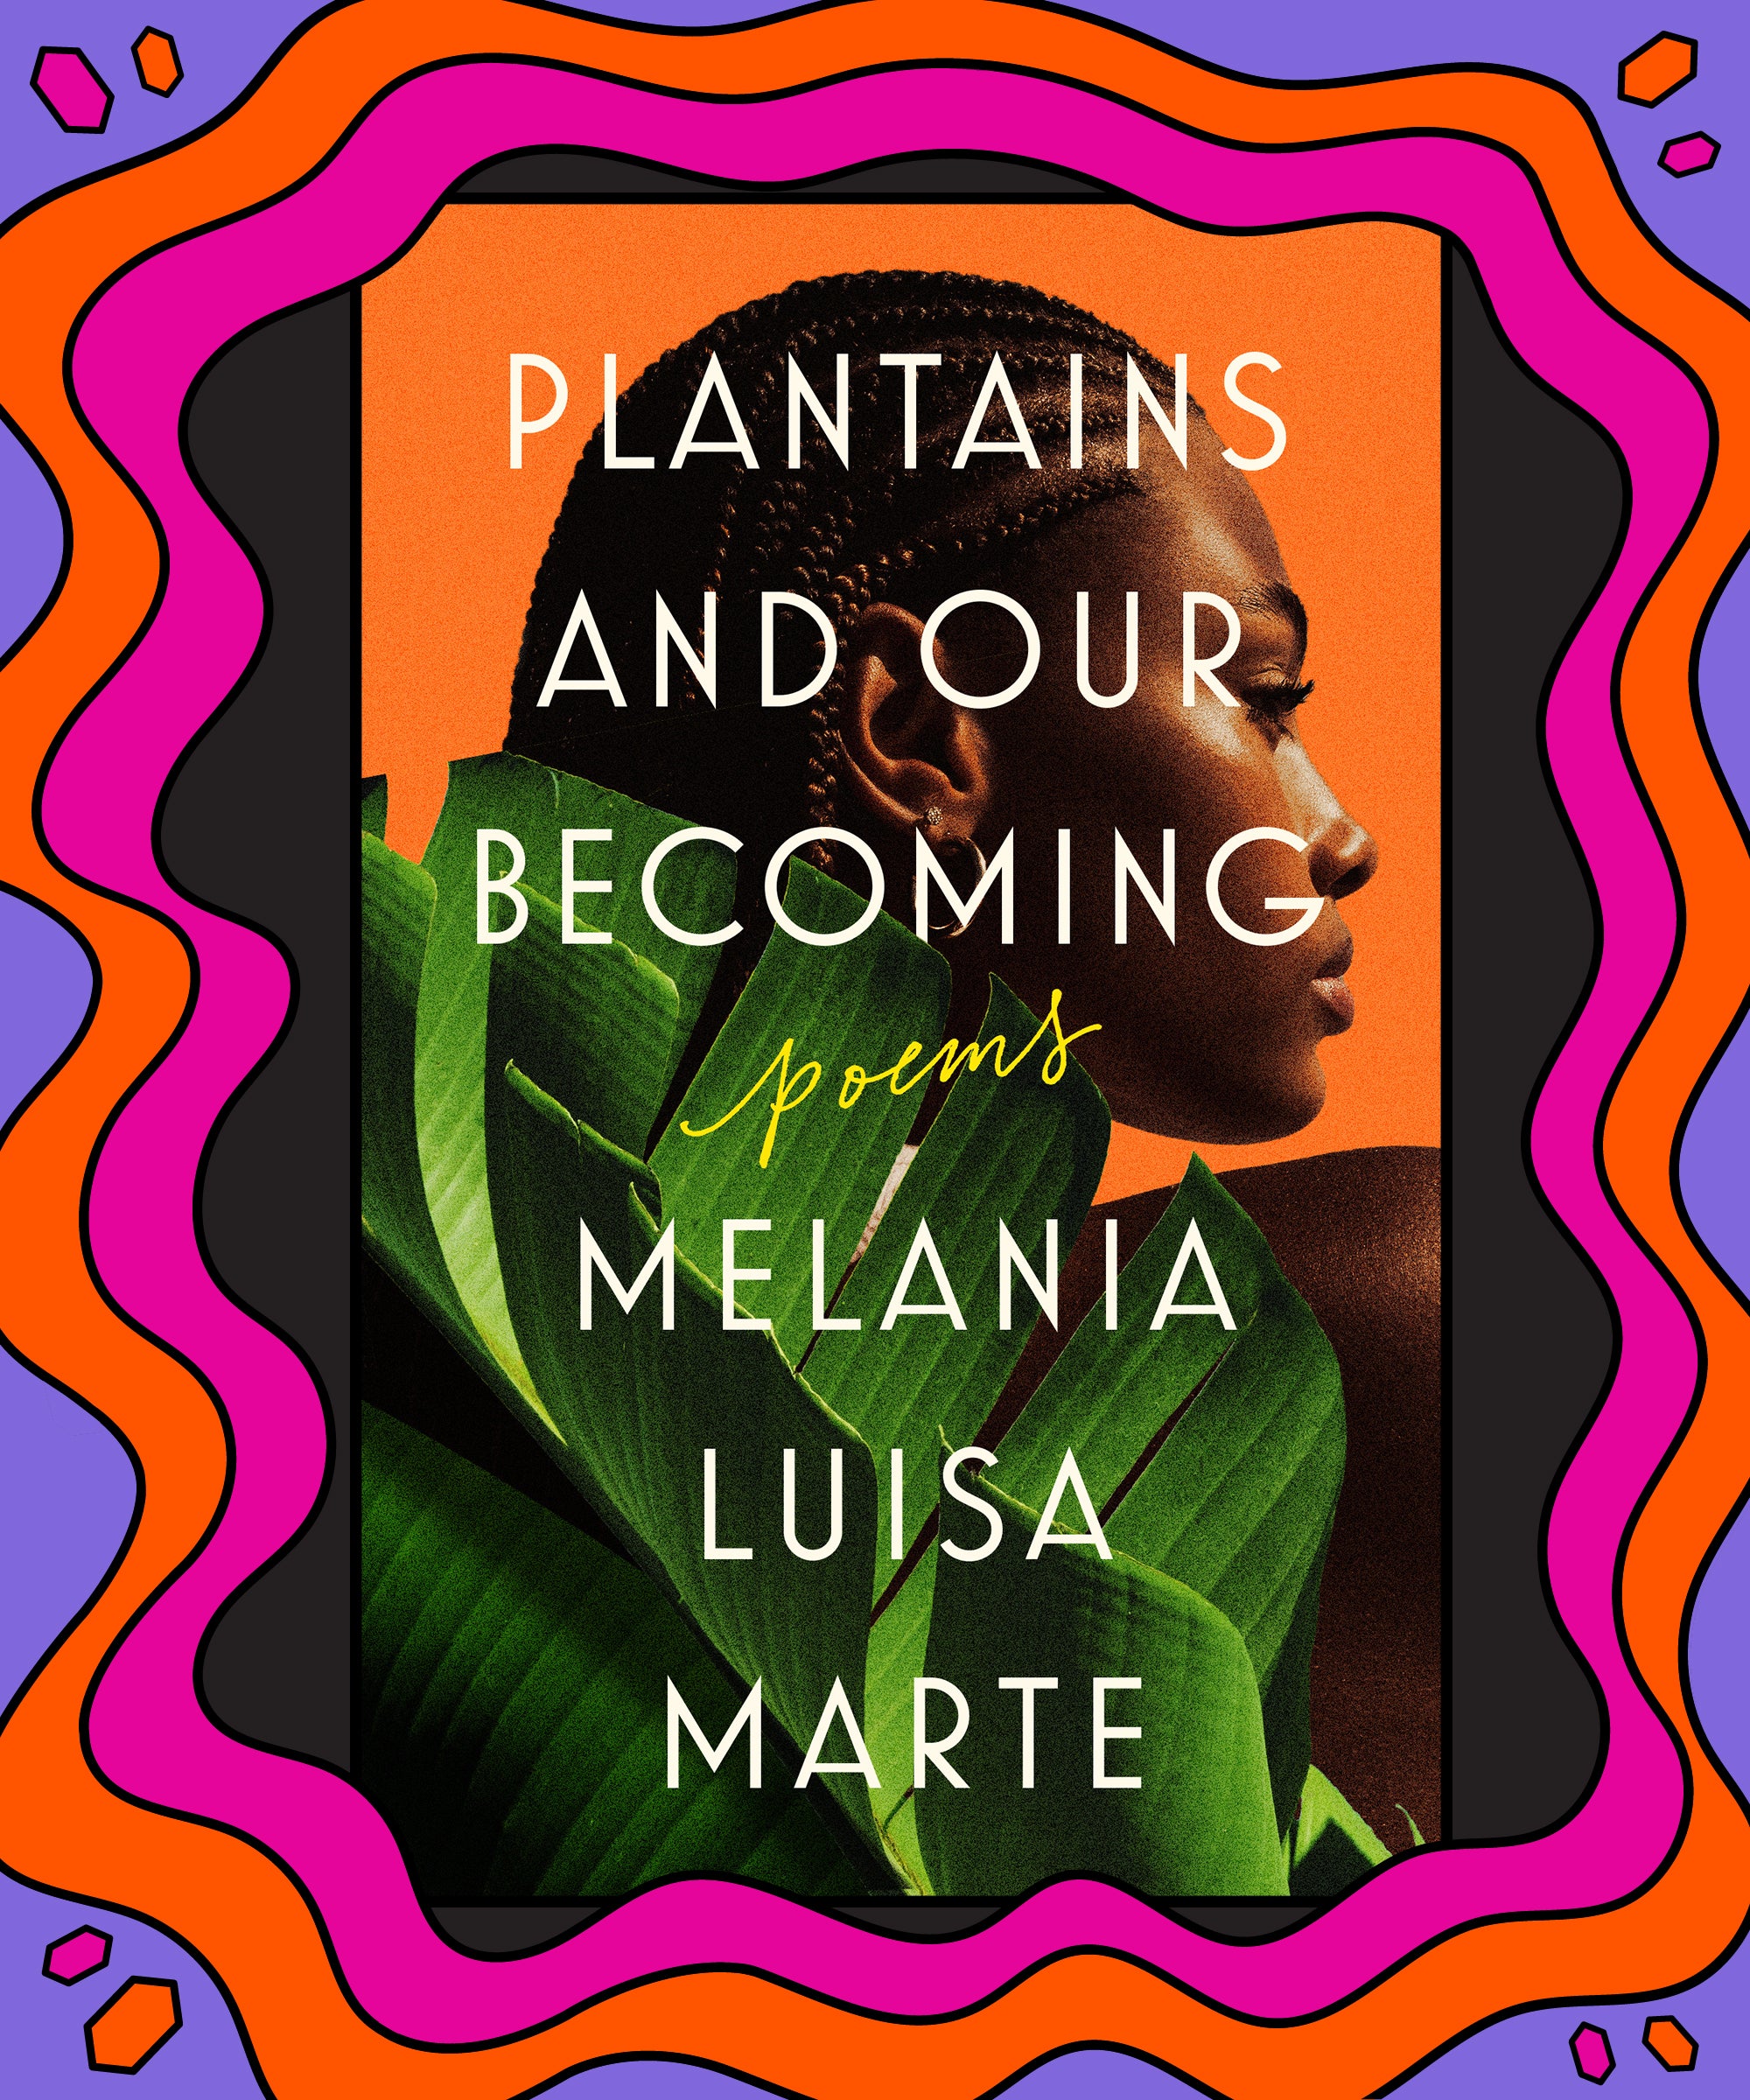 15 books by Black authors to read in 2023 - Reviewed